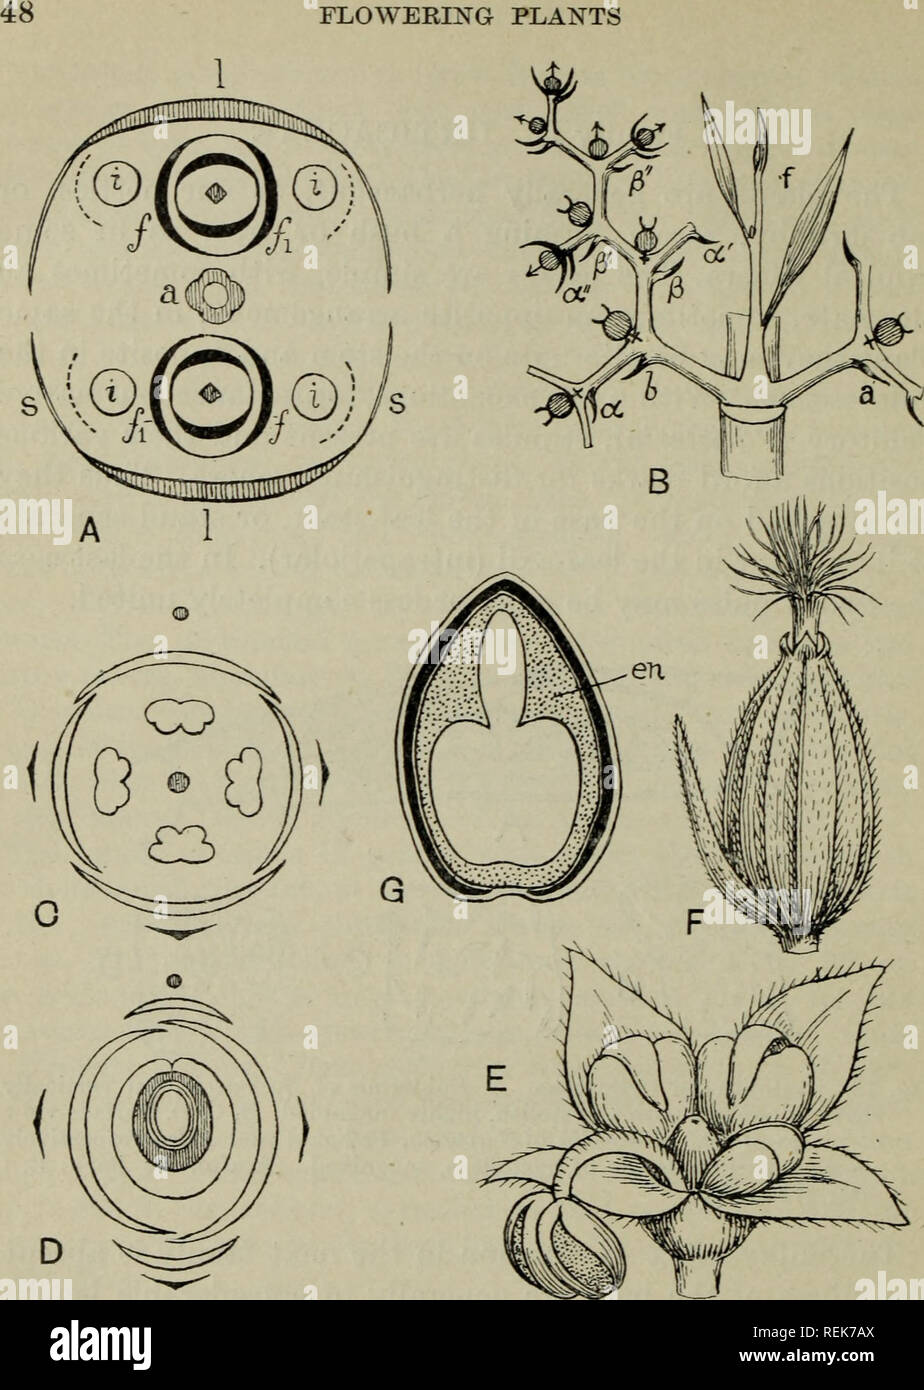 . The classification of flowering plants. Plants. Fig. 14. A. Ground-plan of inflorescence of Urtica dioica; a, main stem bearing a pair of leaves, I, in the axils of which arise two foliage-shoots, the first pair of (unequal) leaves of which are represented by/, Z^; an inflorescence, i, is borne in the axil? of the suppressed pair of fore-leaves of each shoot, indicated by a dotted line, and apparently springs from the stipule, s, of the main leaf. B. Plan of inflorescence of Parietaria erecta. The inflorescences spring in pairs from the base of the short foliage-shoot /; the fore-leaf is her Stock Photo